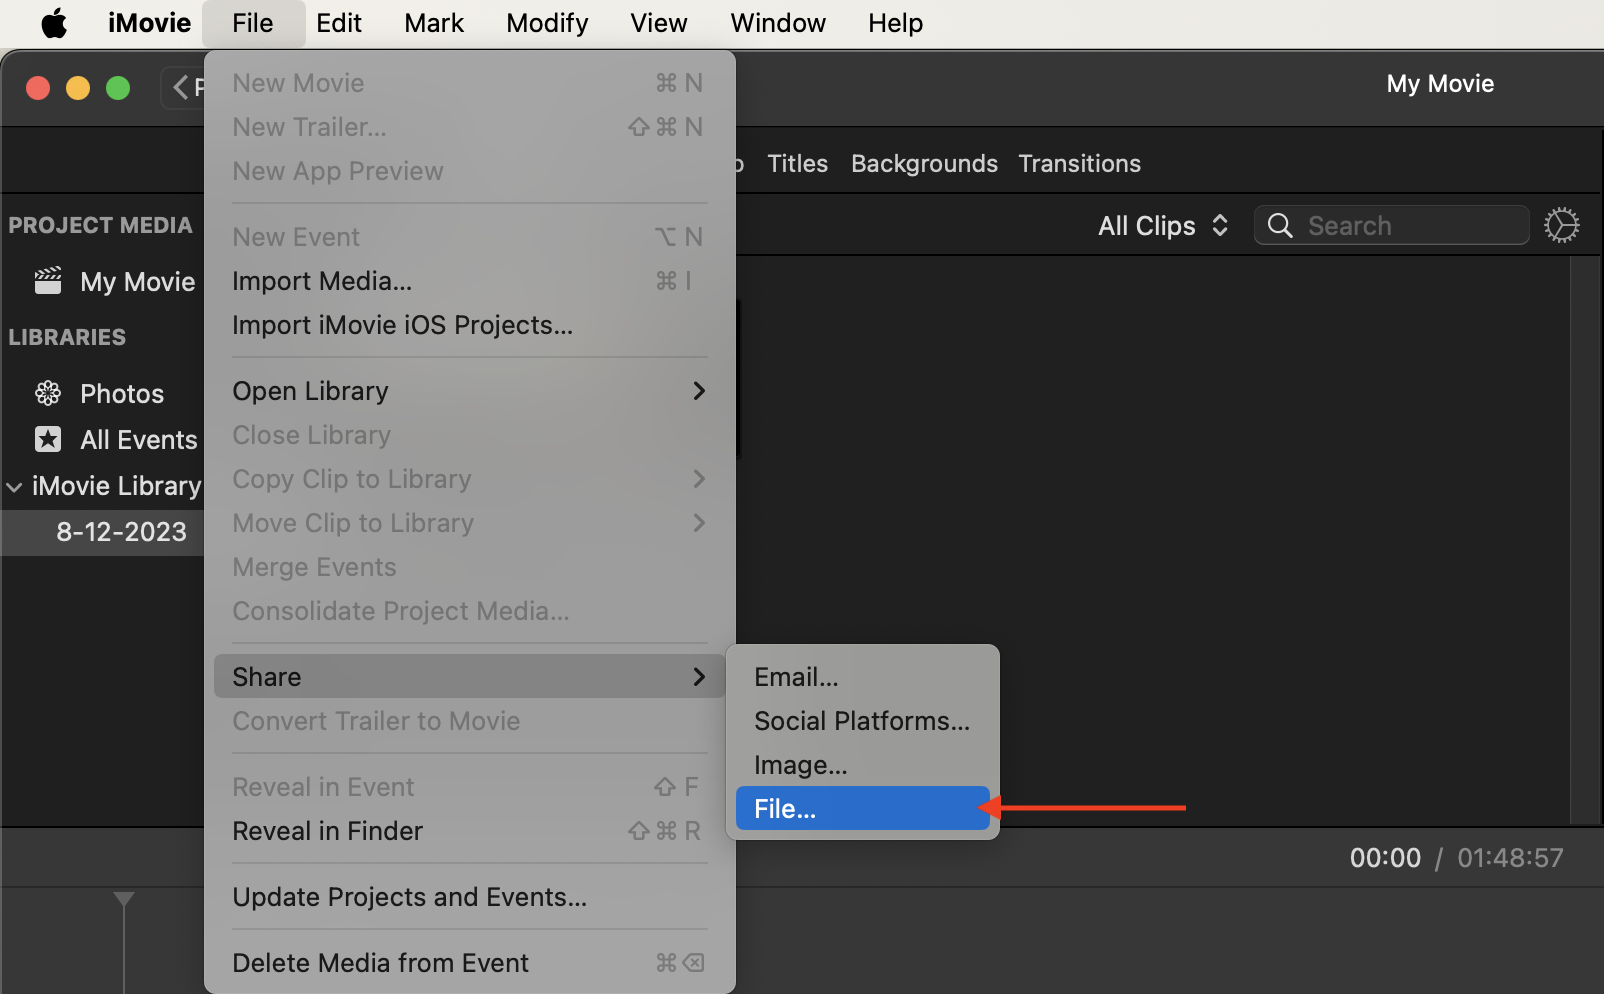 How To Reduce Video Size On Windows Using iMovie: Step 2